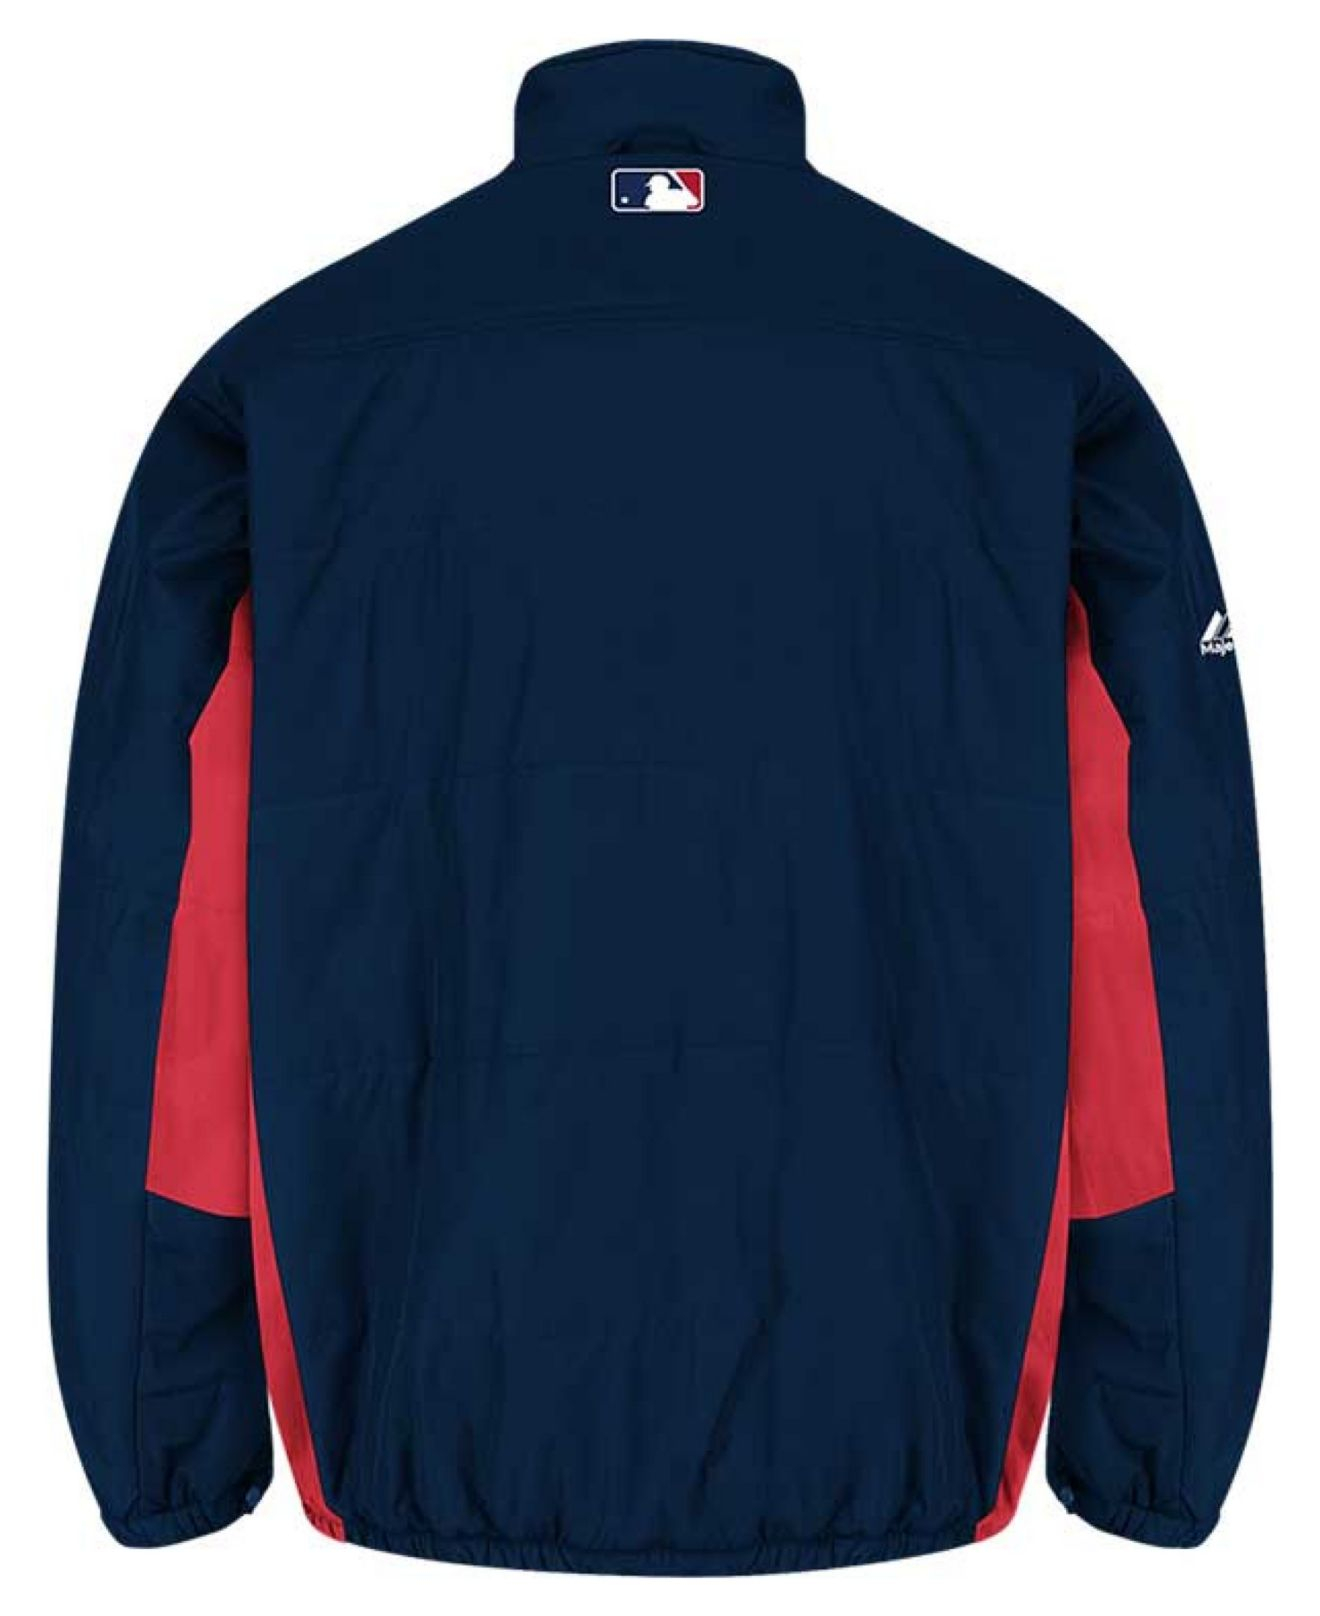 Men's Majestic Royal/Red Texas Rangers Authentic Collection On-Field  3/4-Sleeve Batting Practice Jersey 